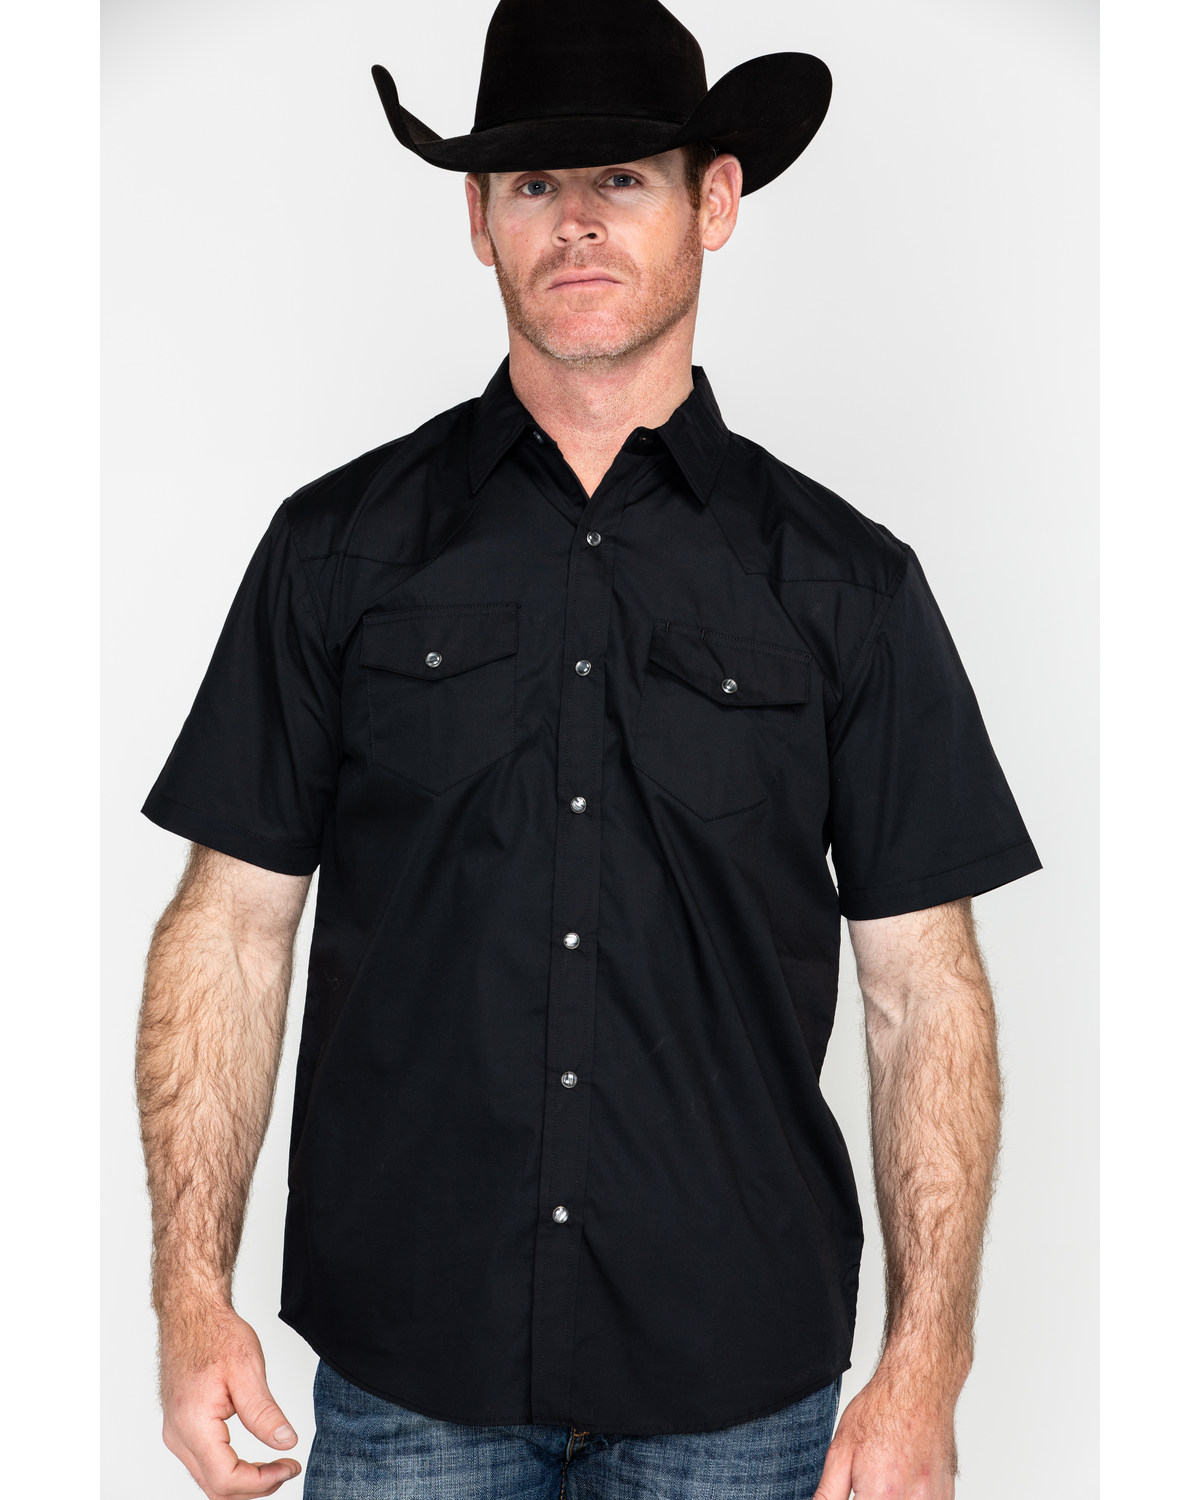 Gibson Men's Solid Short Sleeve Pearl Snap Western Shirt